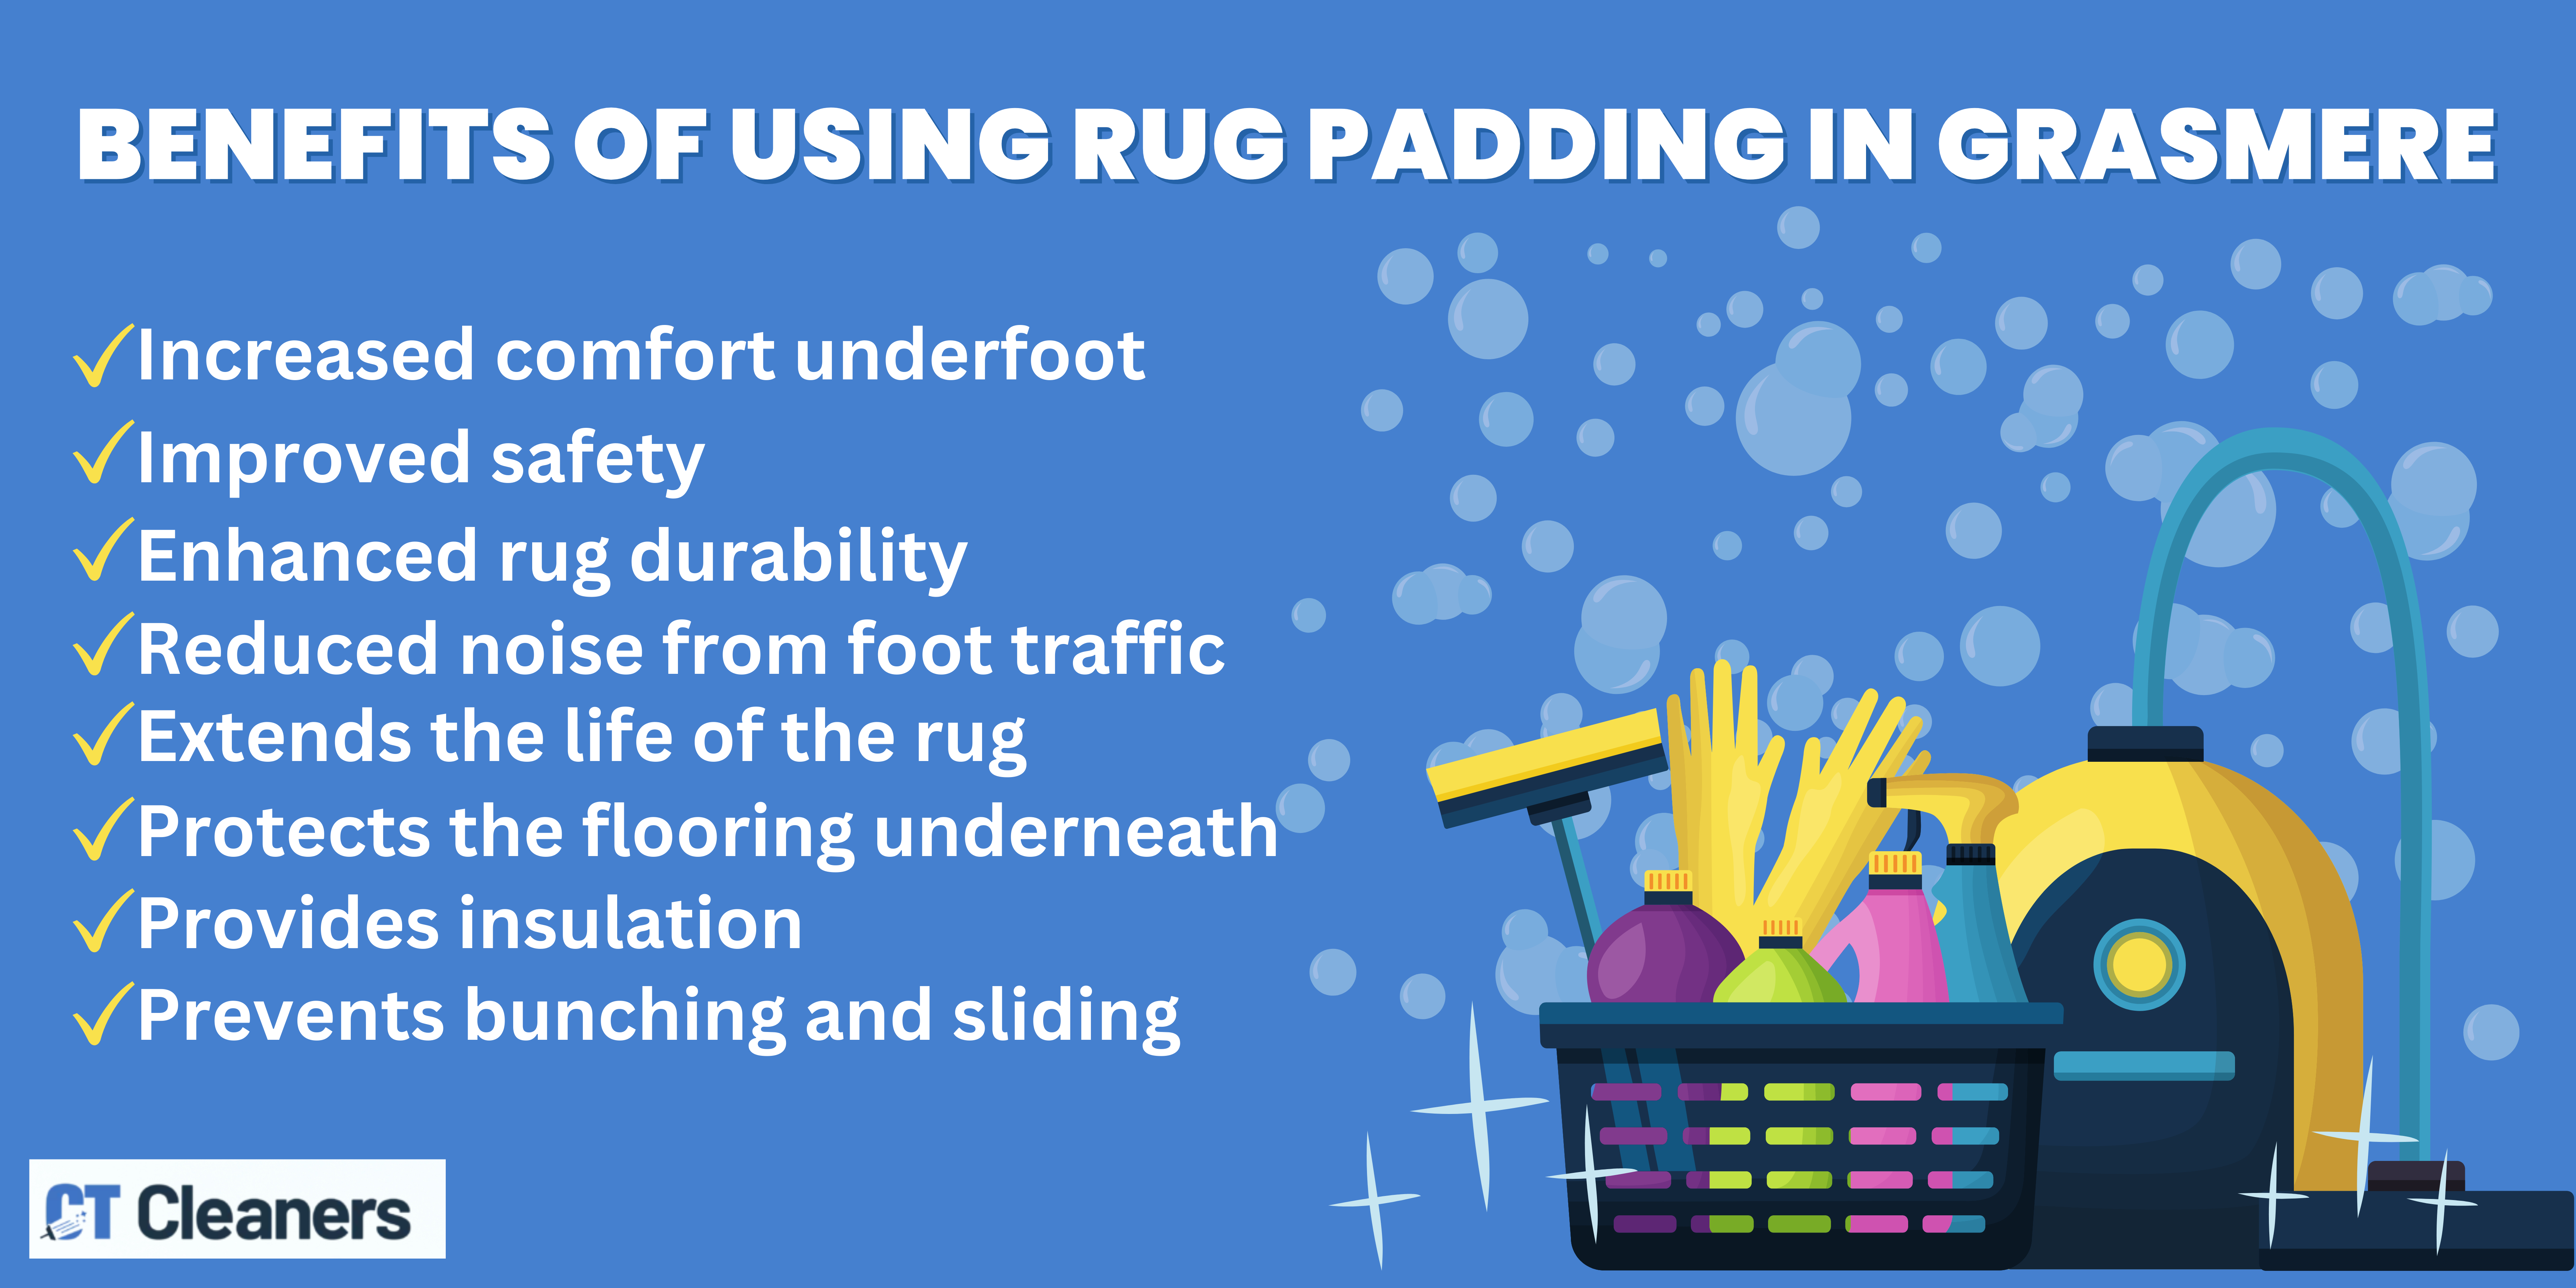 Benefits of Using Rug Padding in Grasmere